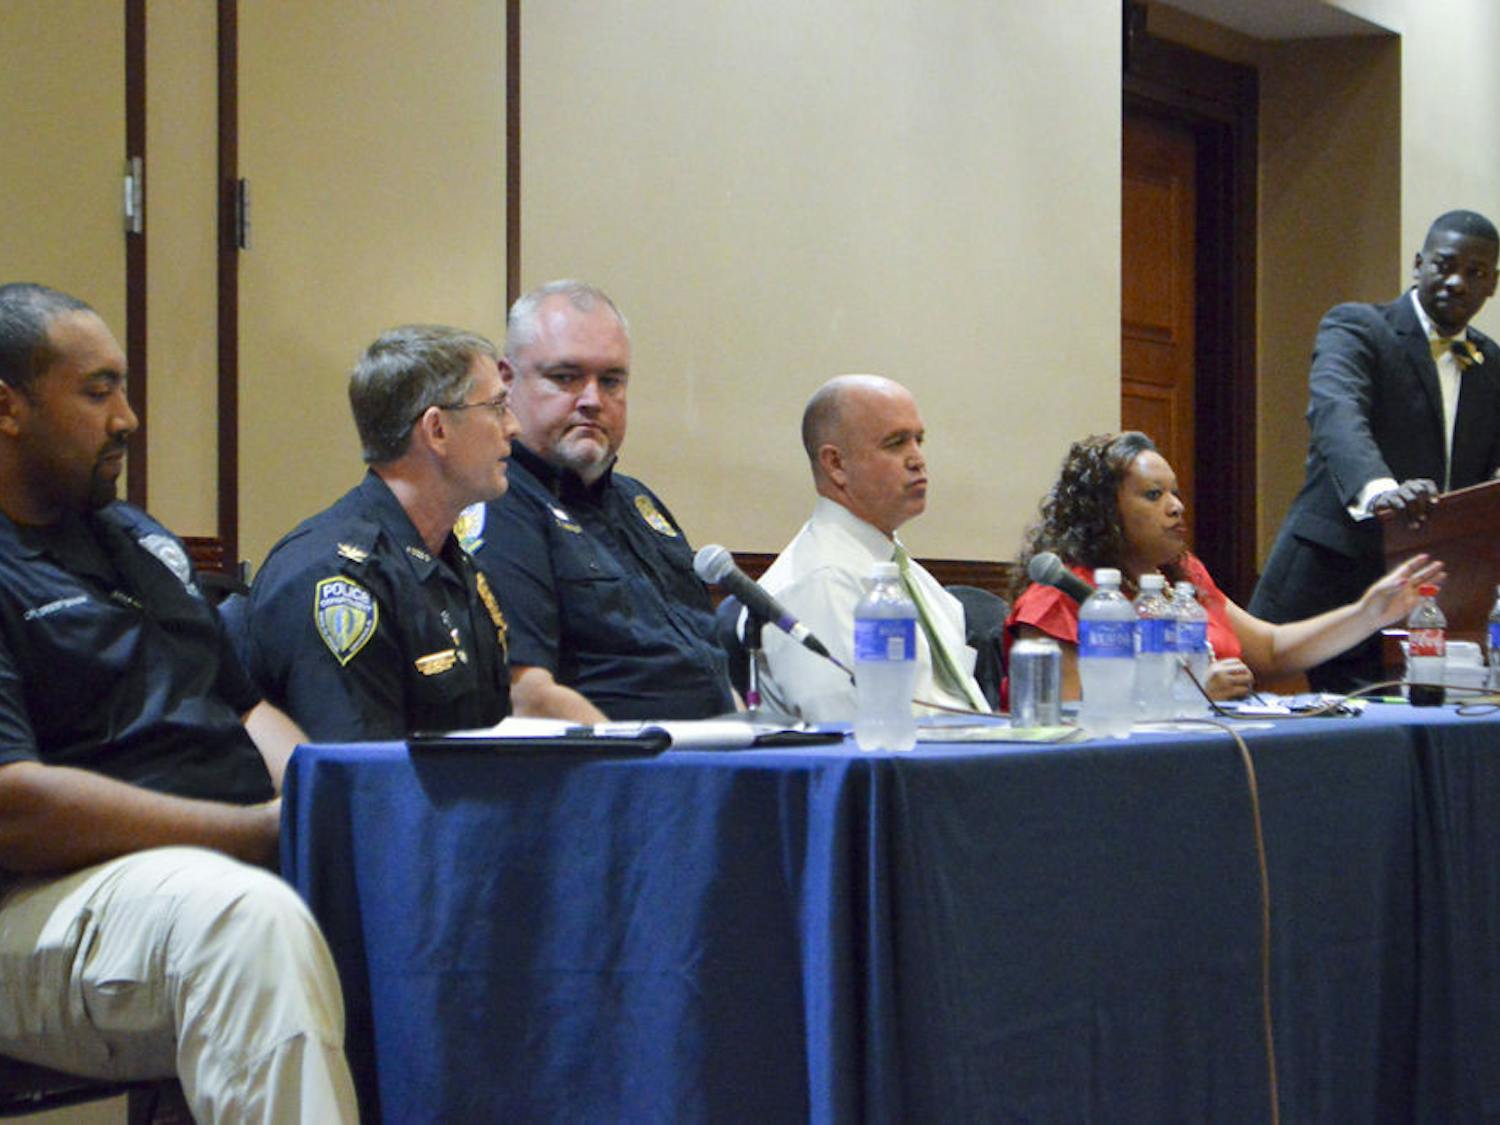 (From left) Santa Fe College Chief Ed Book, University Police Deputy Chief Darren Baxley, Gainesville Police Chief Tony Jones and UF leaders hold a forum Thursday night to discuss police brutality around the country in the Reitz Union Grand Ballroom.